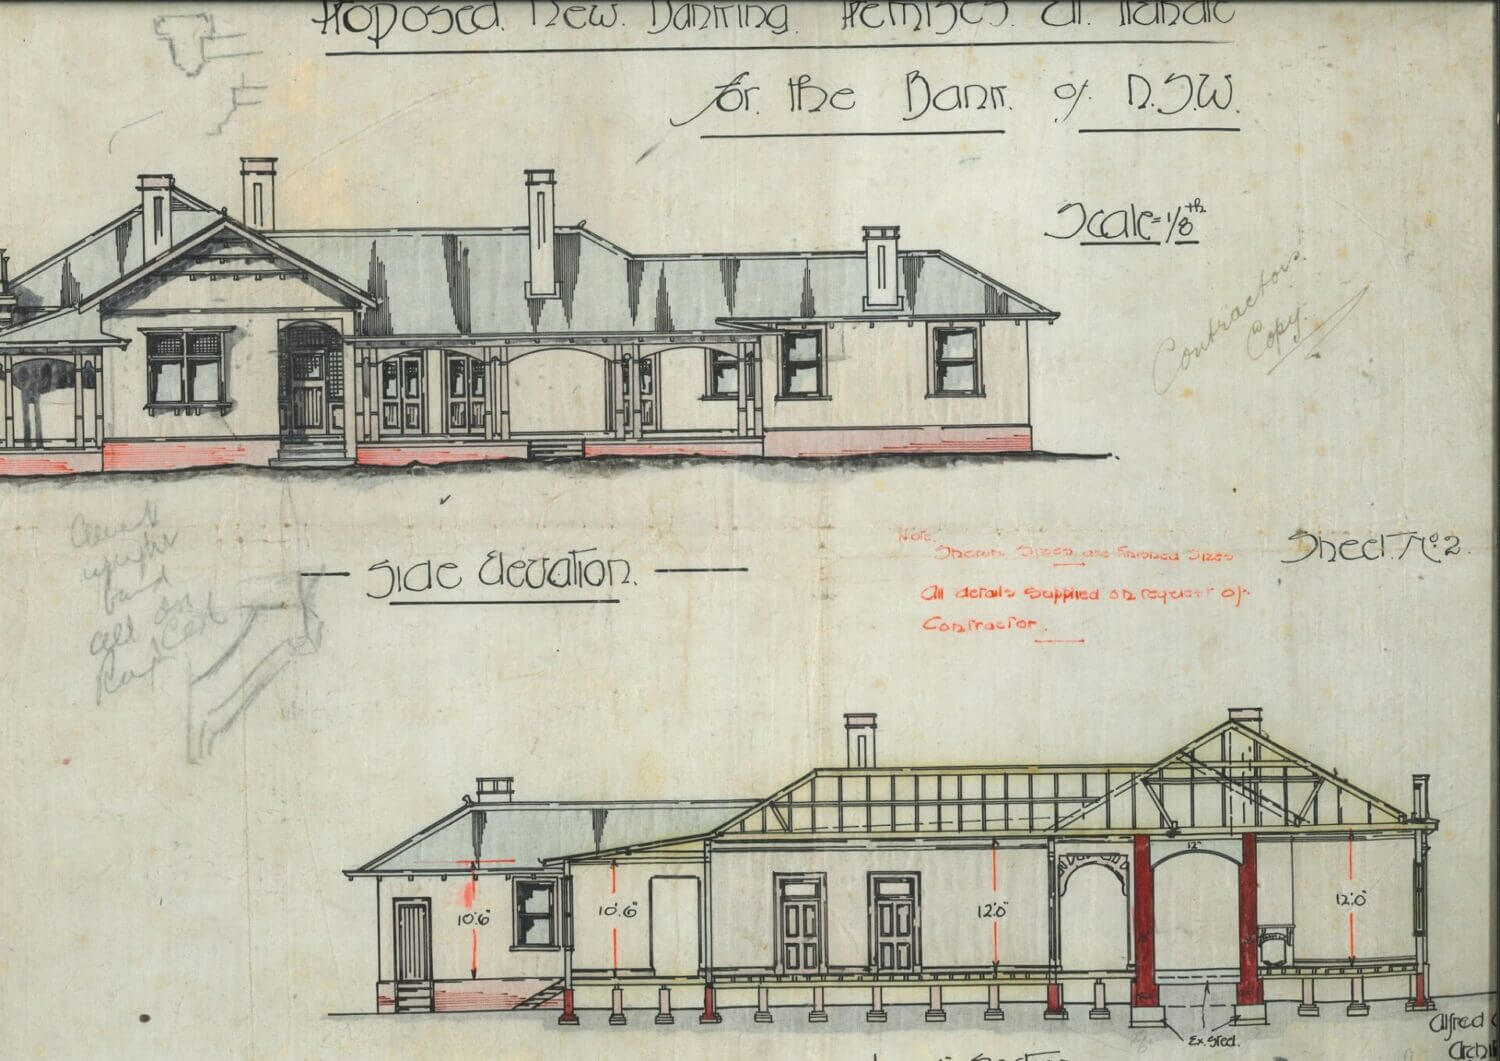 The Contractors copy of the architecture plans for the Bank of NSW.